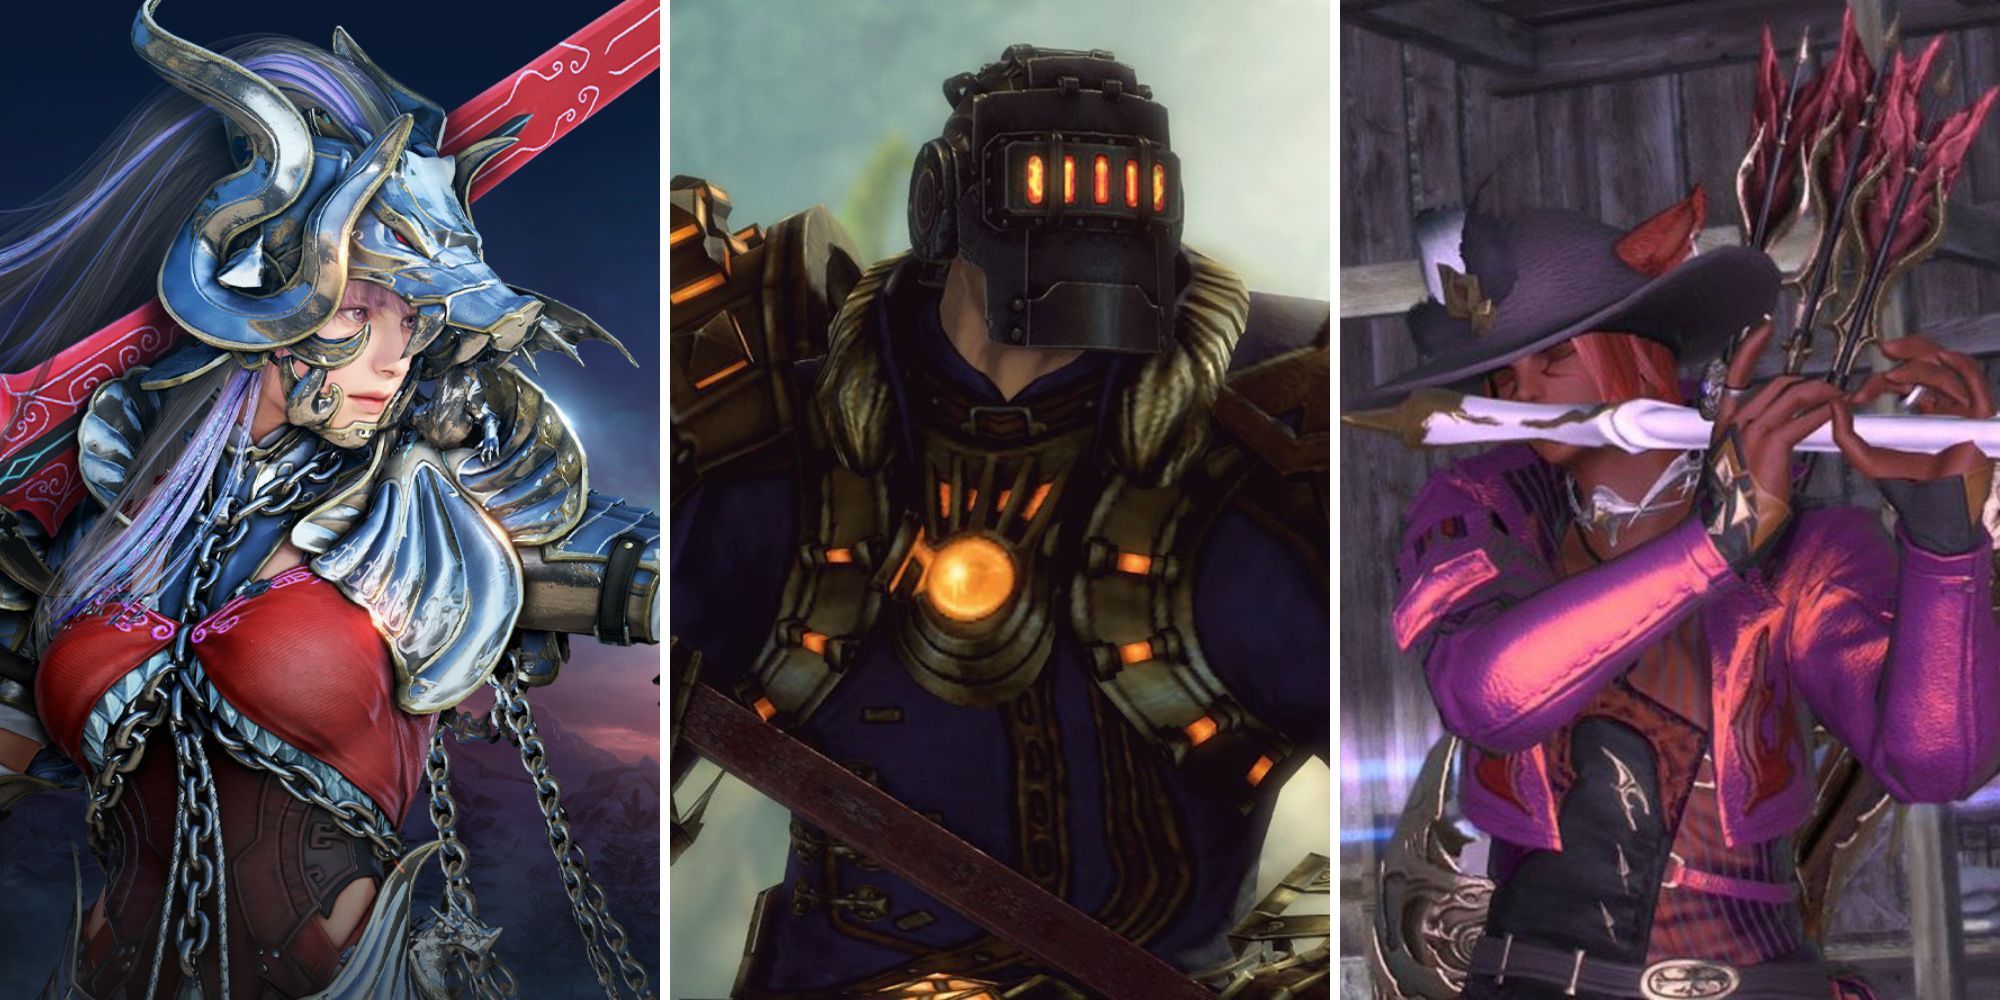 A grid showing three images from the games Black desert Online, Guild Wars 2, and Final Fantasy 14: A Realm Reborn